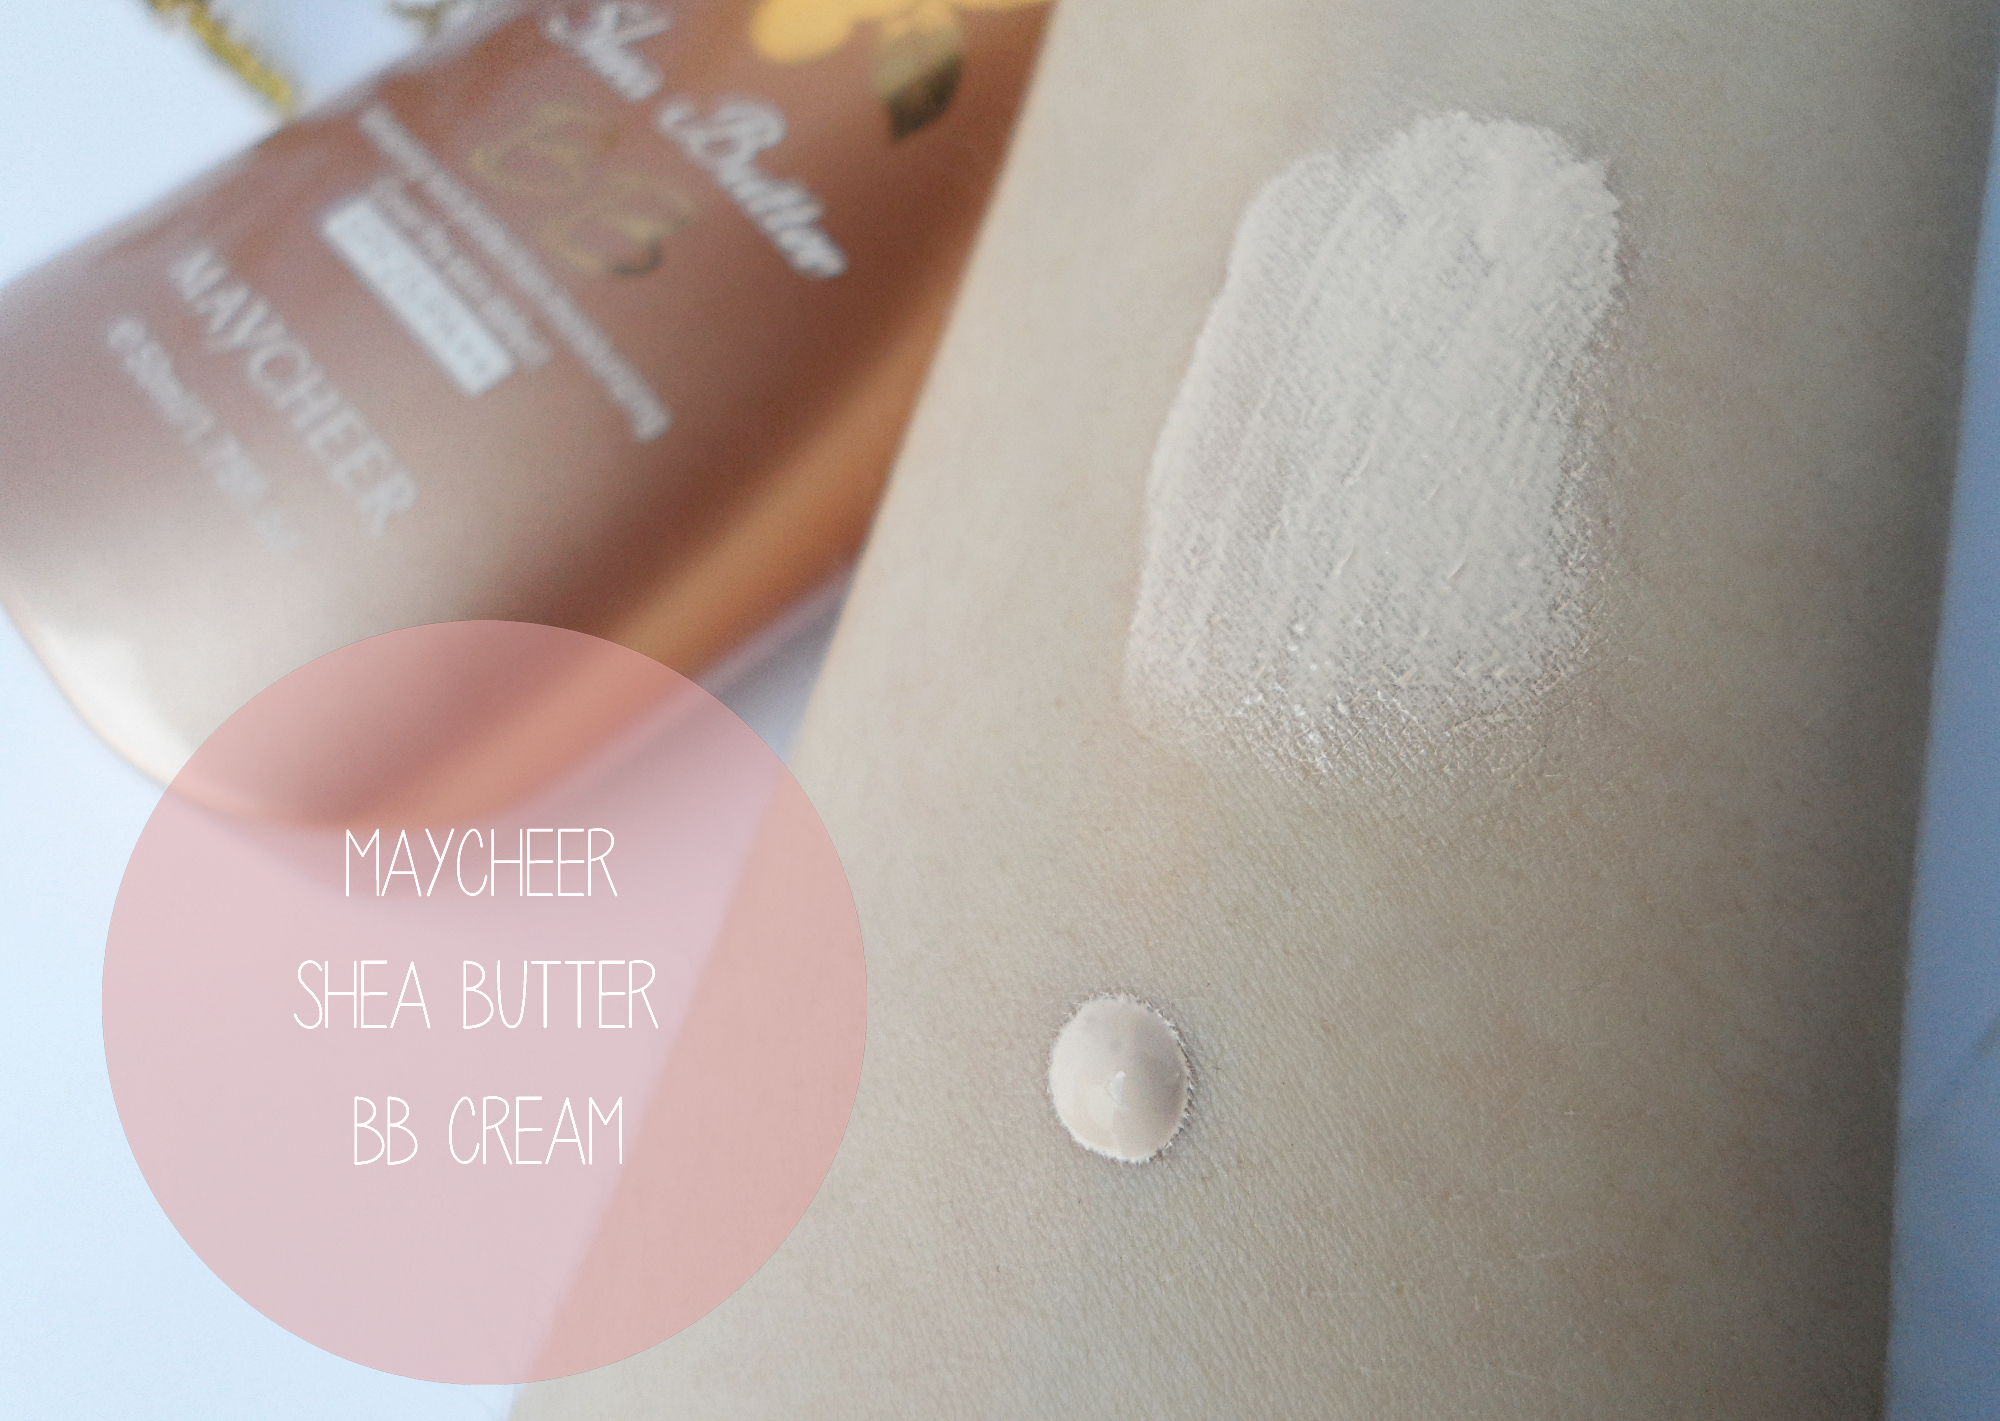 affordable bb cream with moisturizing effect for pale, light skin complexion see the review and swatches